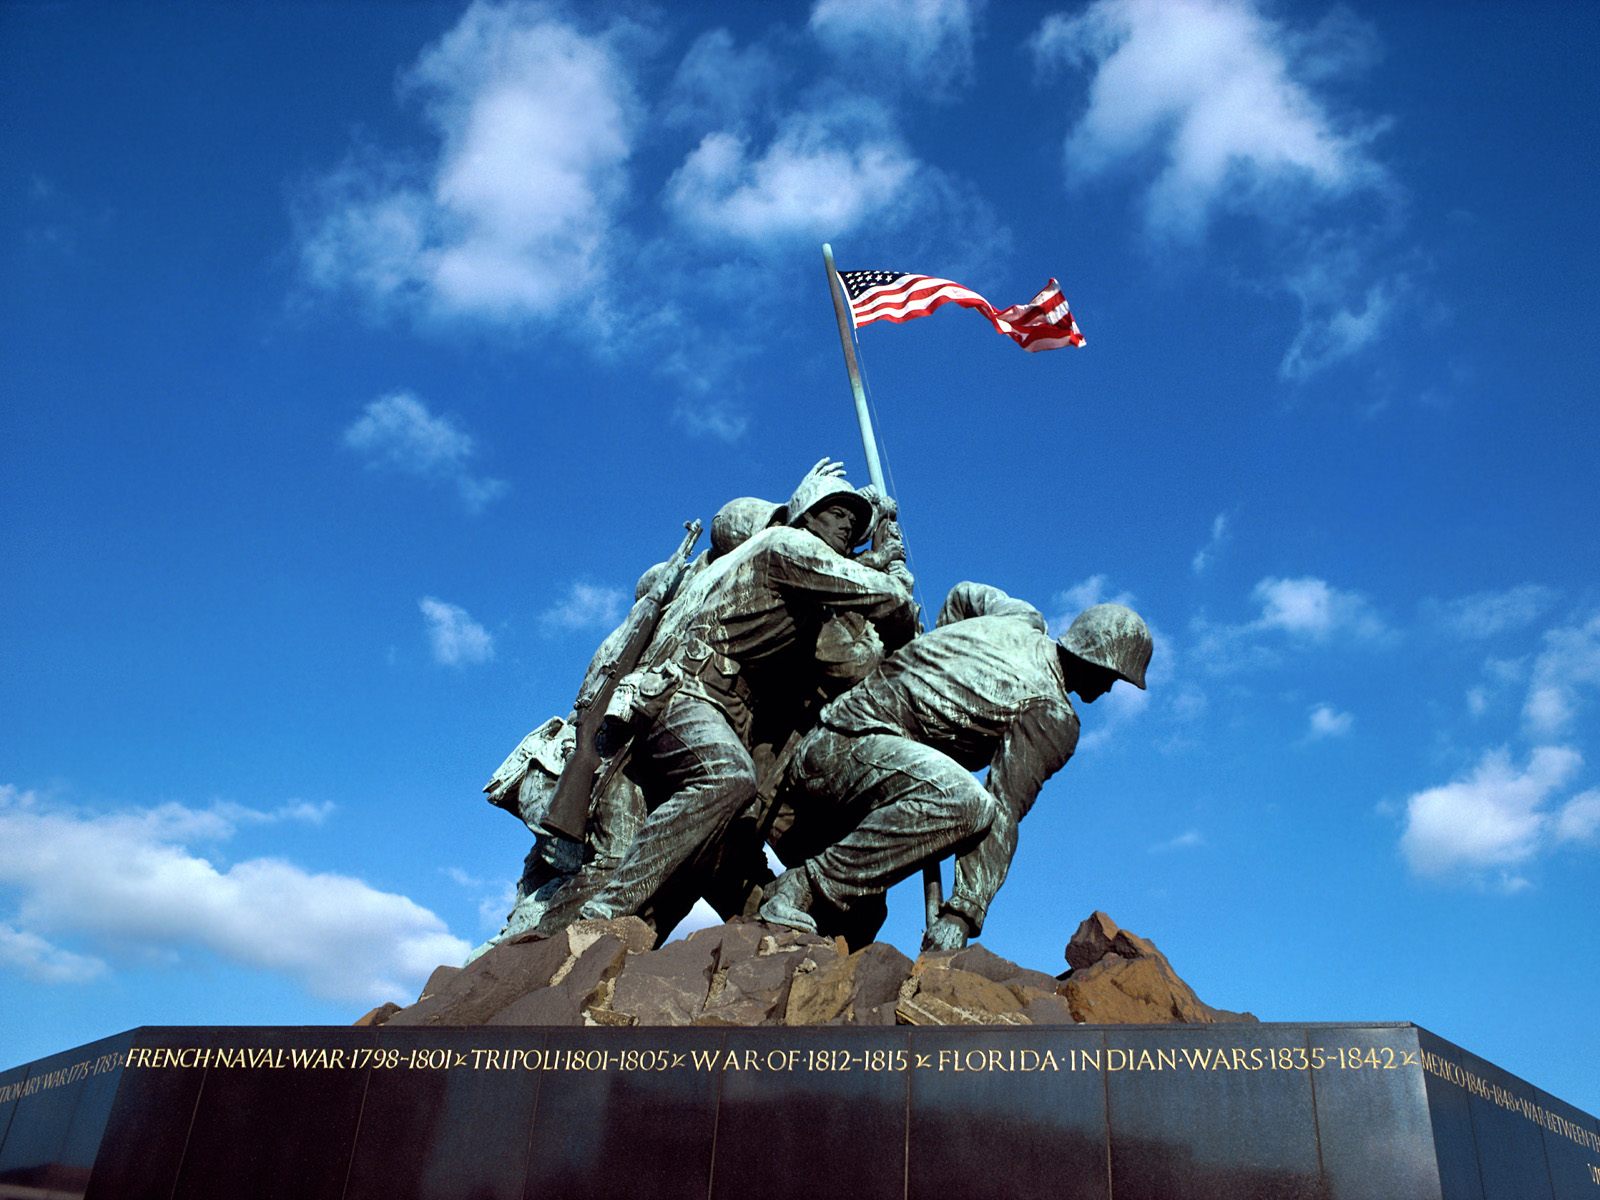 Memorial Day Powerpoint Background Tips